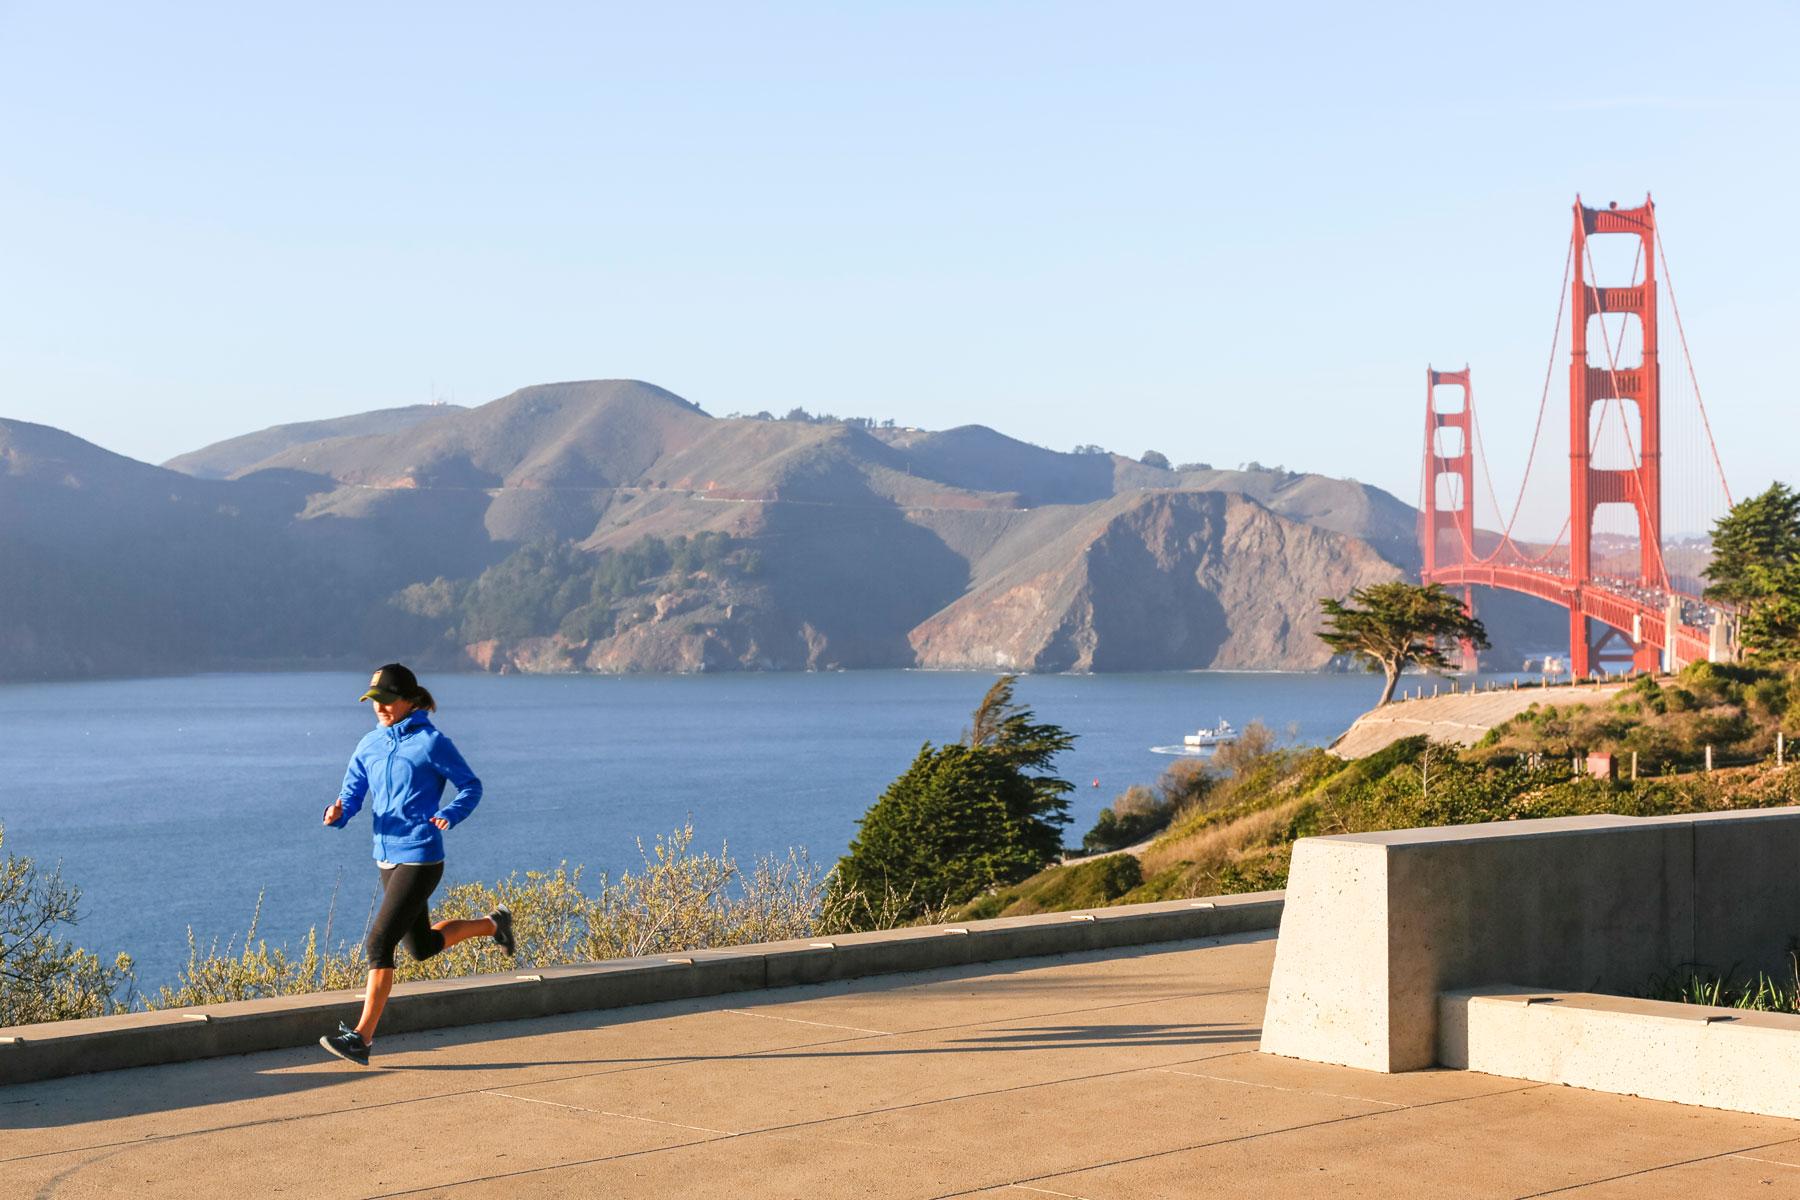 Runner at the Pacific Overlook, with the Golden Gate Bridge in the background. Photo by Jay Graham.